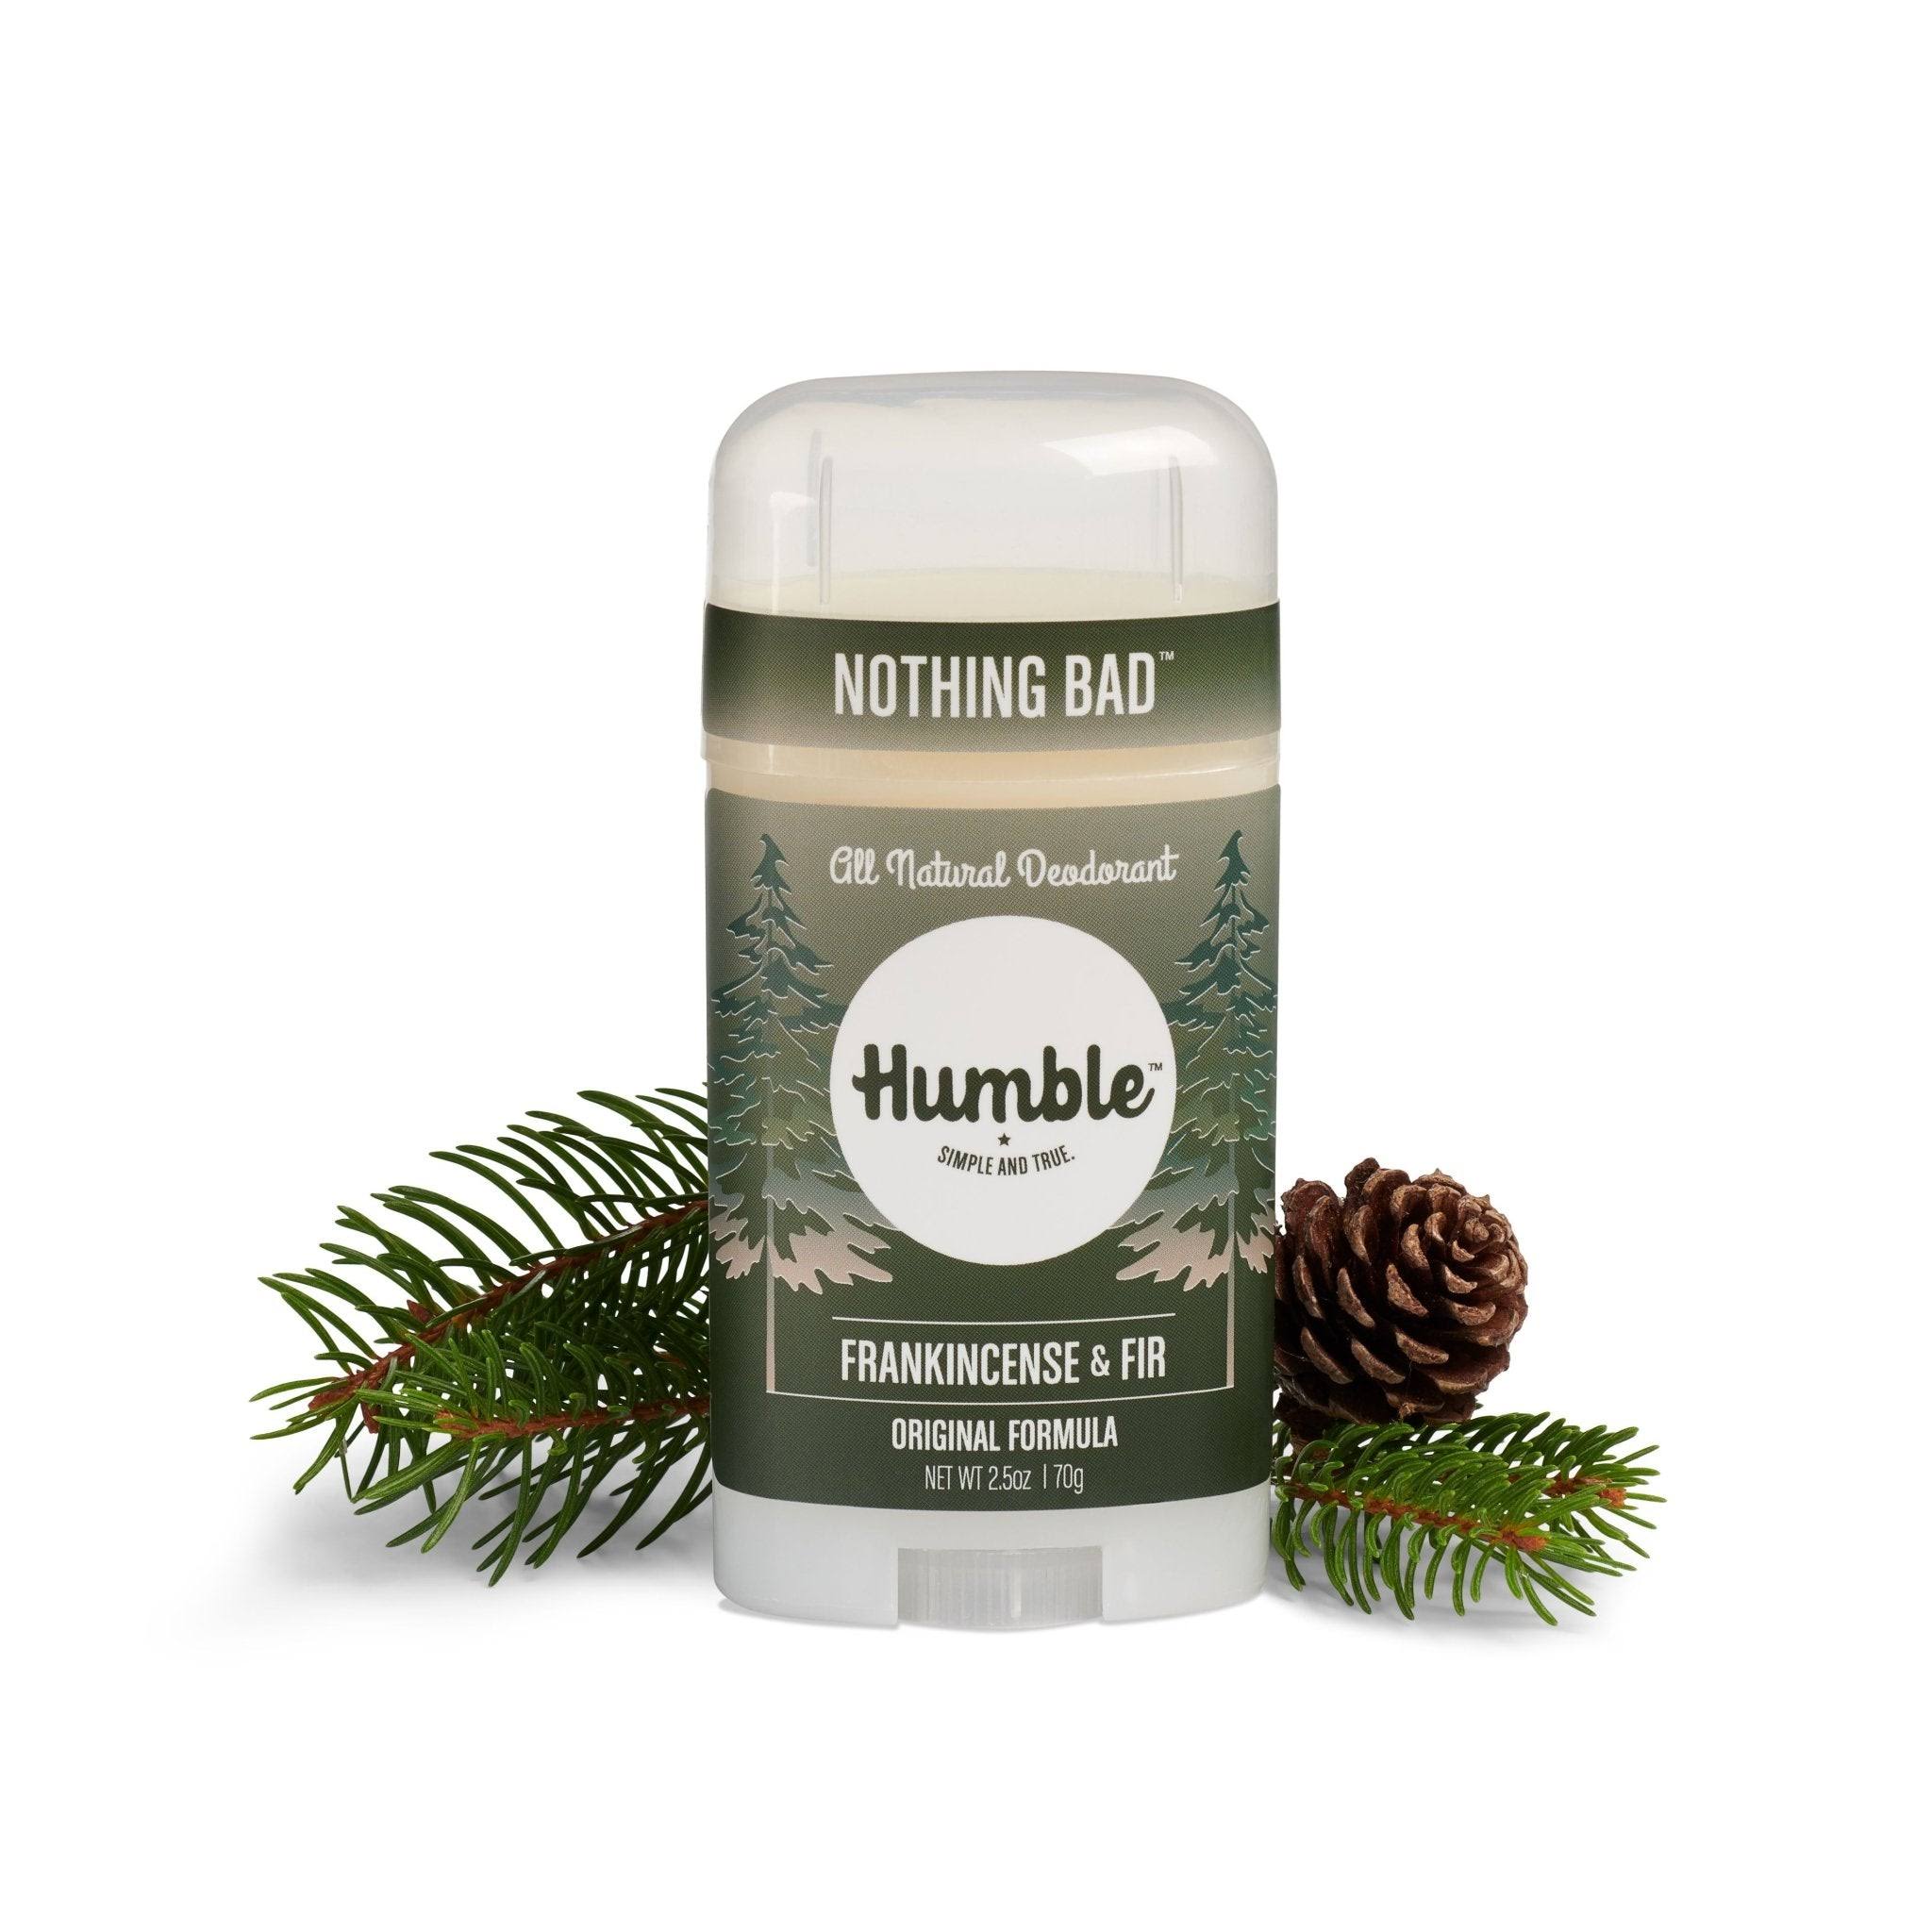 Humble All Natural Deodorant - Simply Unscented, 2.5oz